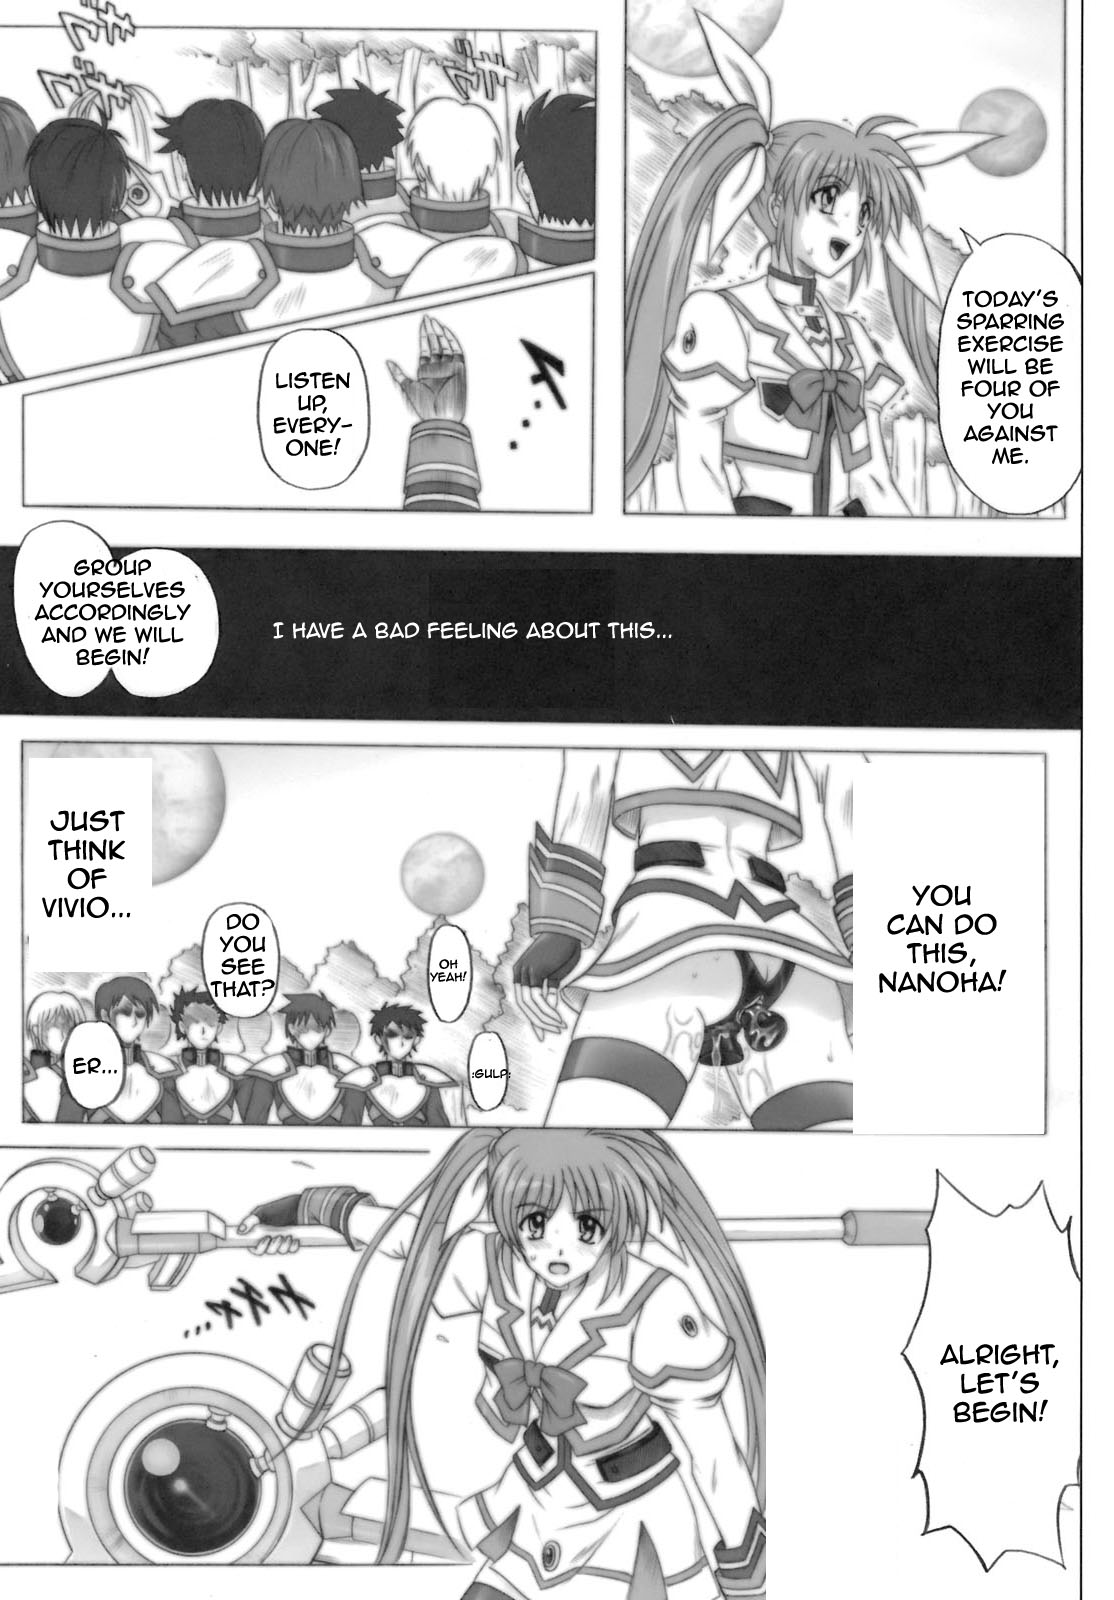 840 Color Classic Situation Note Extention (Mahou Shoujo Lyrical Nanoha) [English] [Rewrite] page 19 full